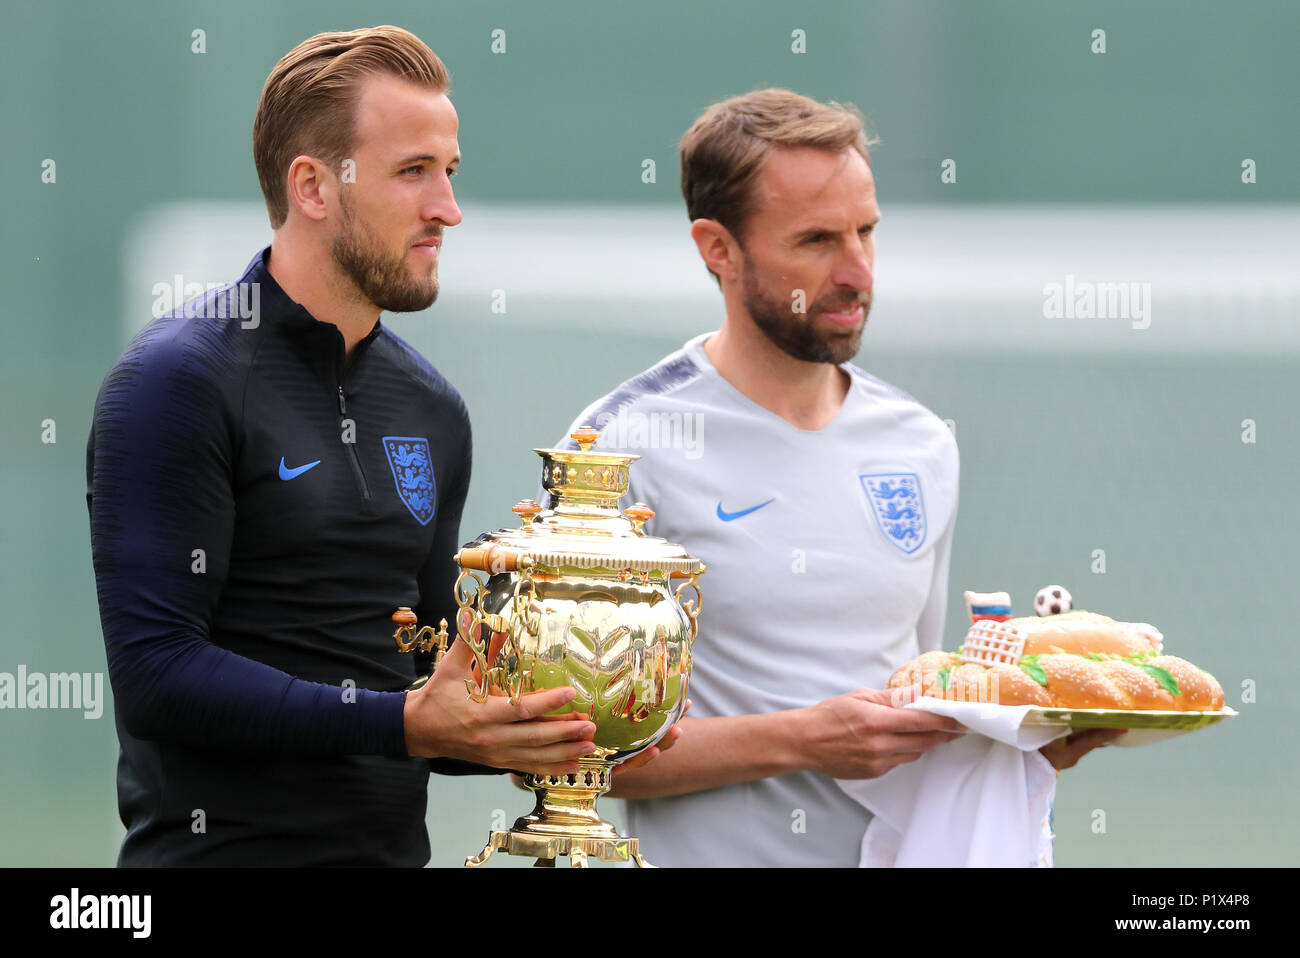 England's Harry Kane (left) and manager Gareth Southgate receive a Russian samovar - a heated metal container traditionally used to heat and boil water, and a karavai - a large round loaf of bread, both symbolizing hospitality during the training session at the Spartak Zelenogorsk Stadium, Repino. Stock Photo